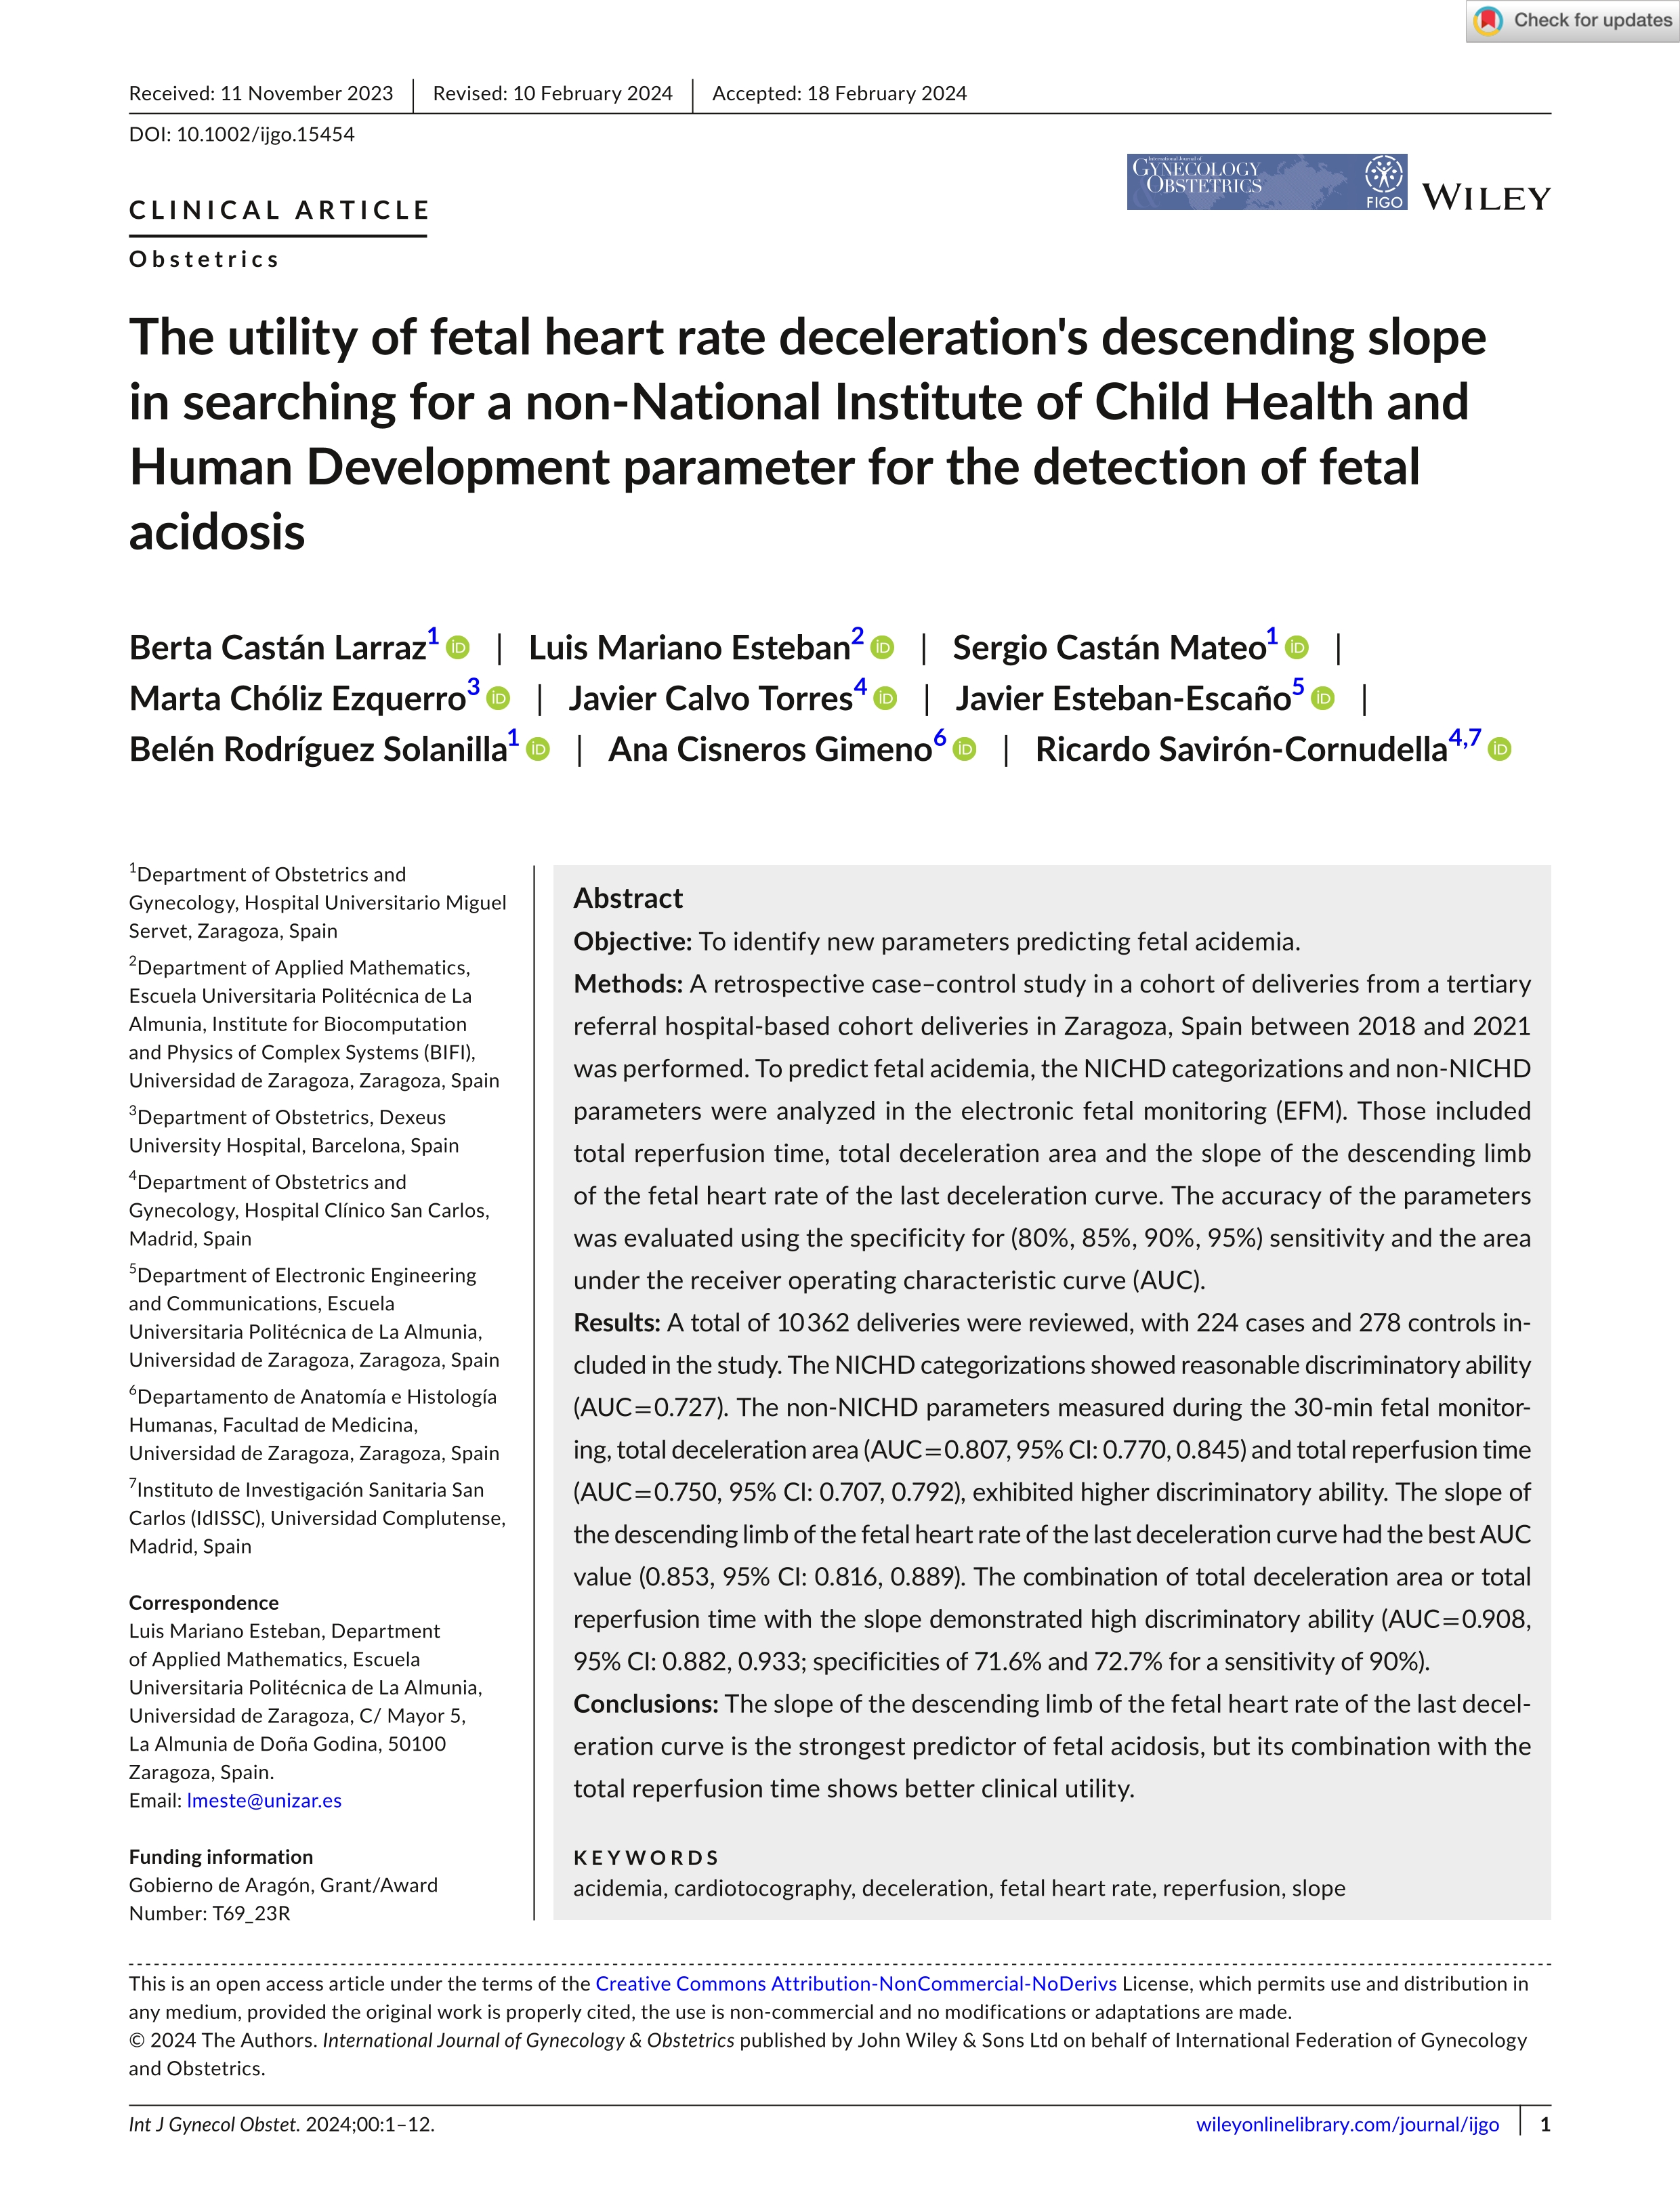 The utility of fetal heart rate deceleration's descending slope in searching for a non-National Institute of Child Health and Human Development parameter for the detection of fetal acidosis